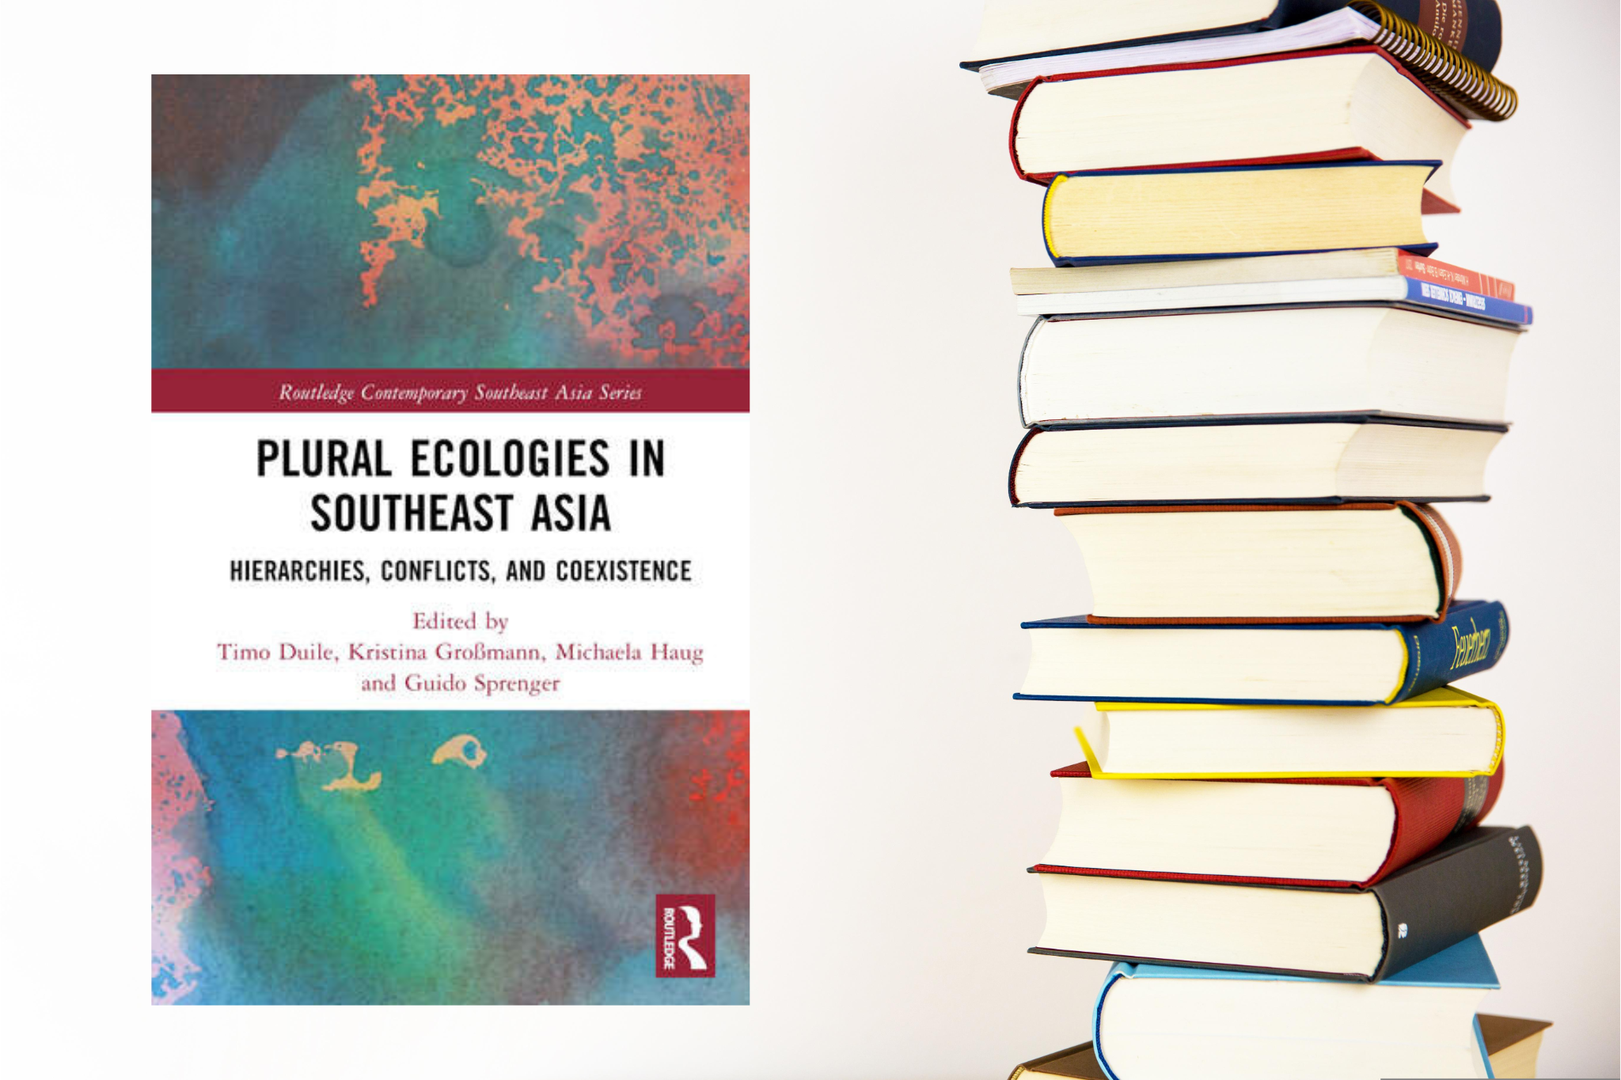 Duile, Timo; Großmann, Kristina; Haug, Michaela; Sprenger, Guido (2023) (Hrsg.) Plural Ecologies in Southeast Asia: Hierarchies, Conflicts, and Coexistence. London & New York: Routledge